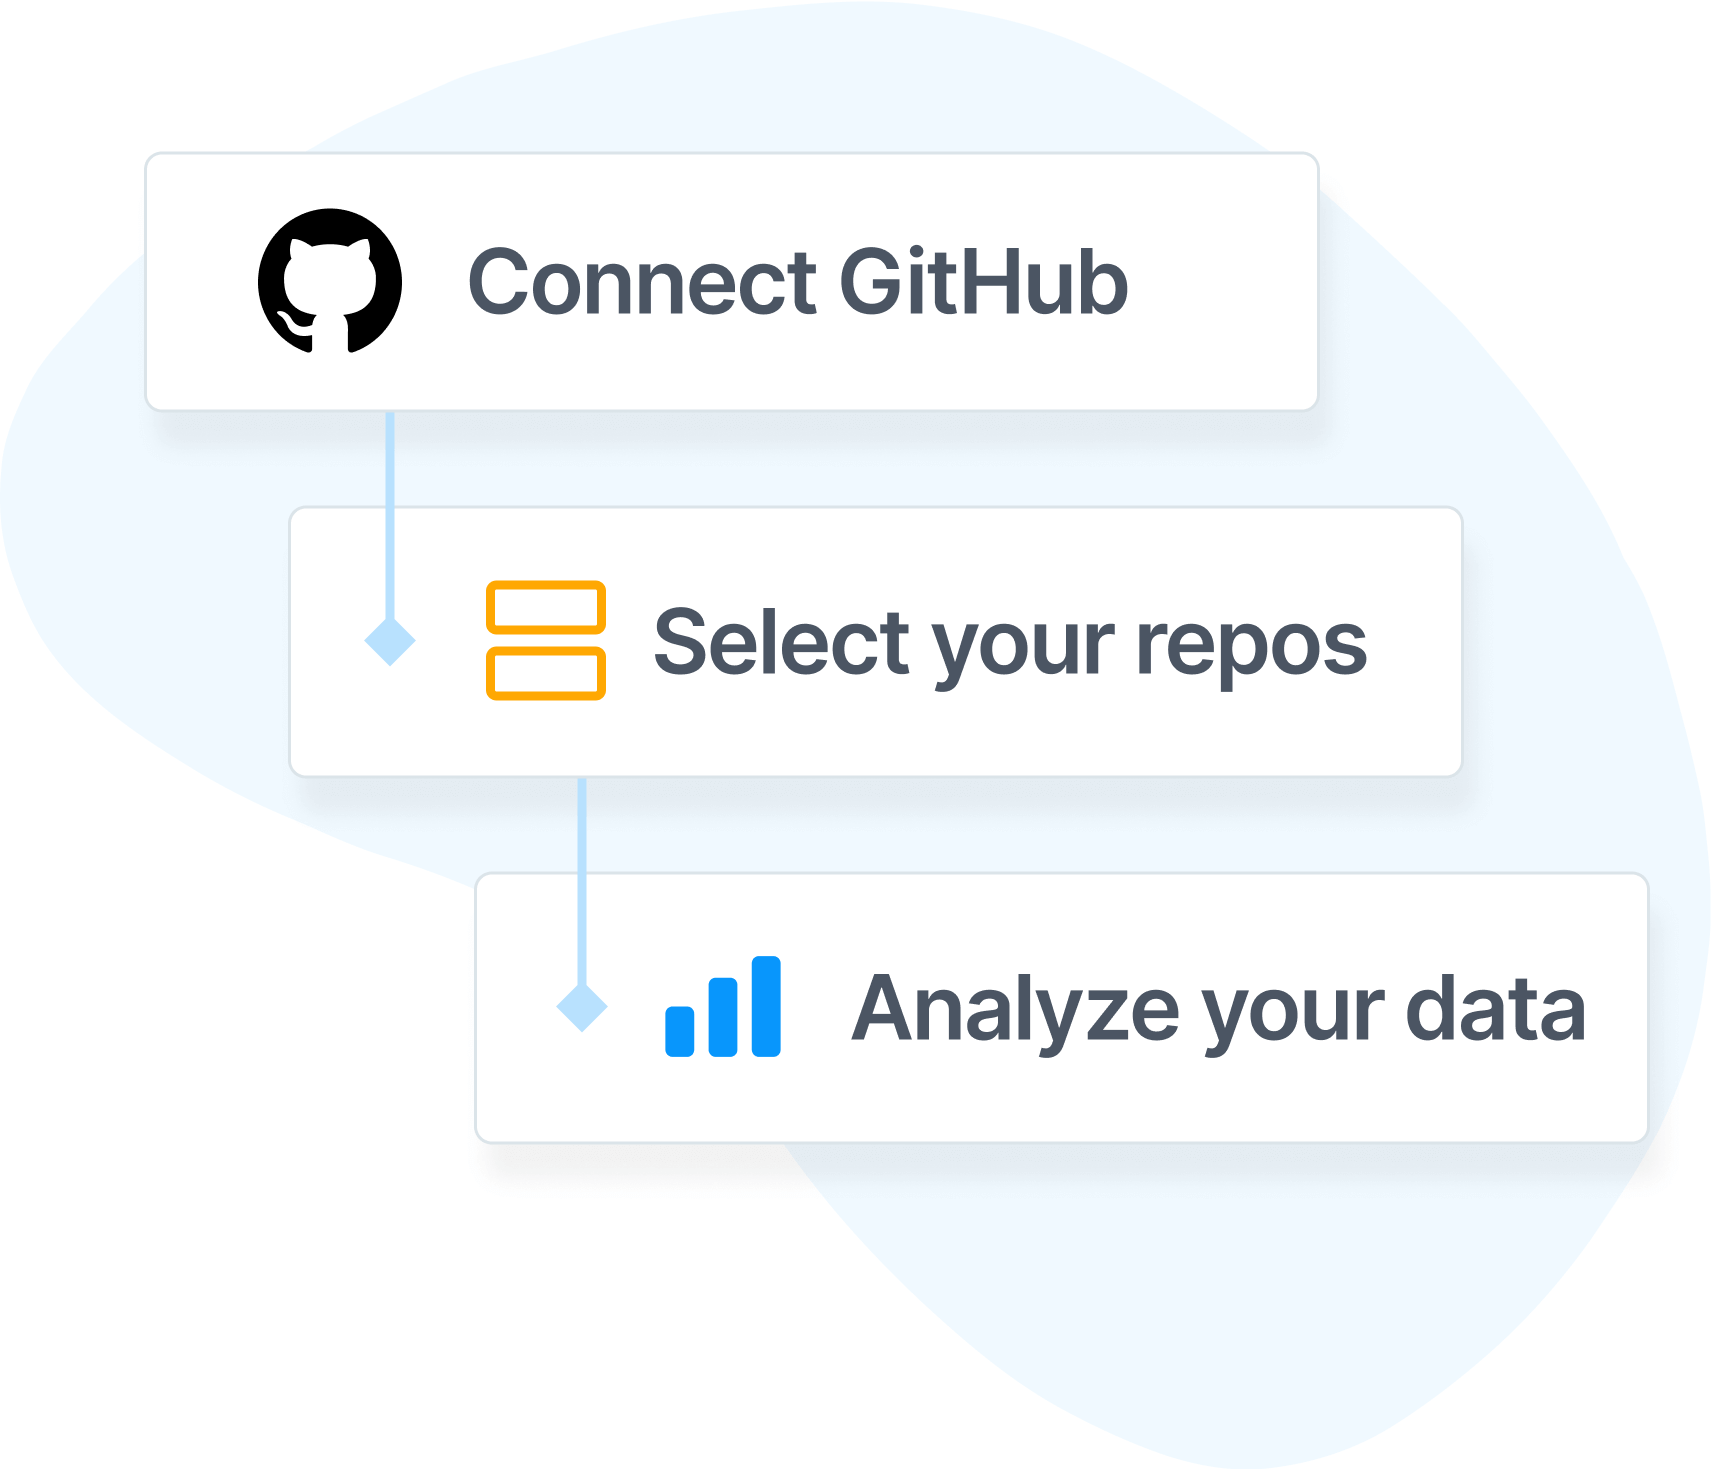 Connect GitHub for fast setup and visibility